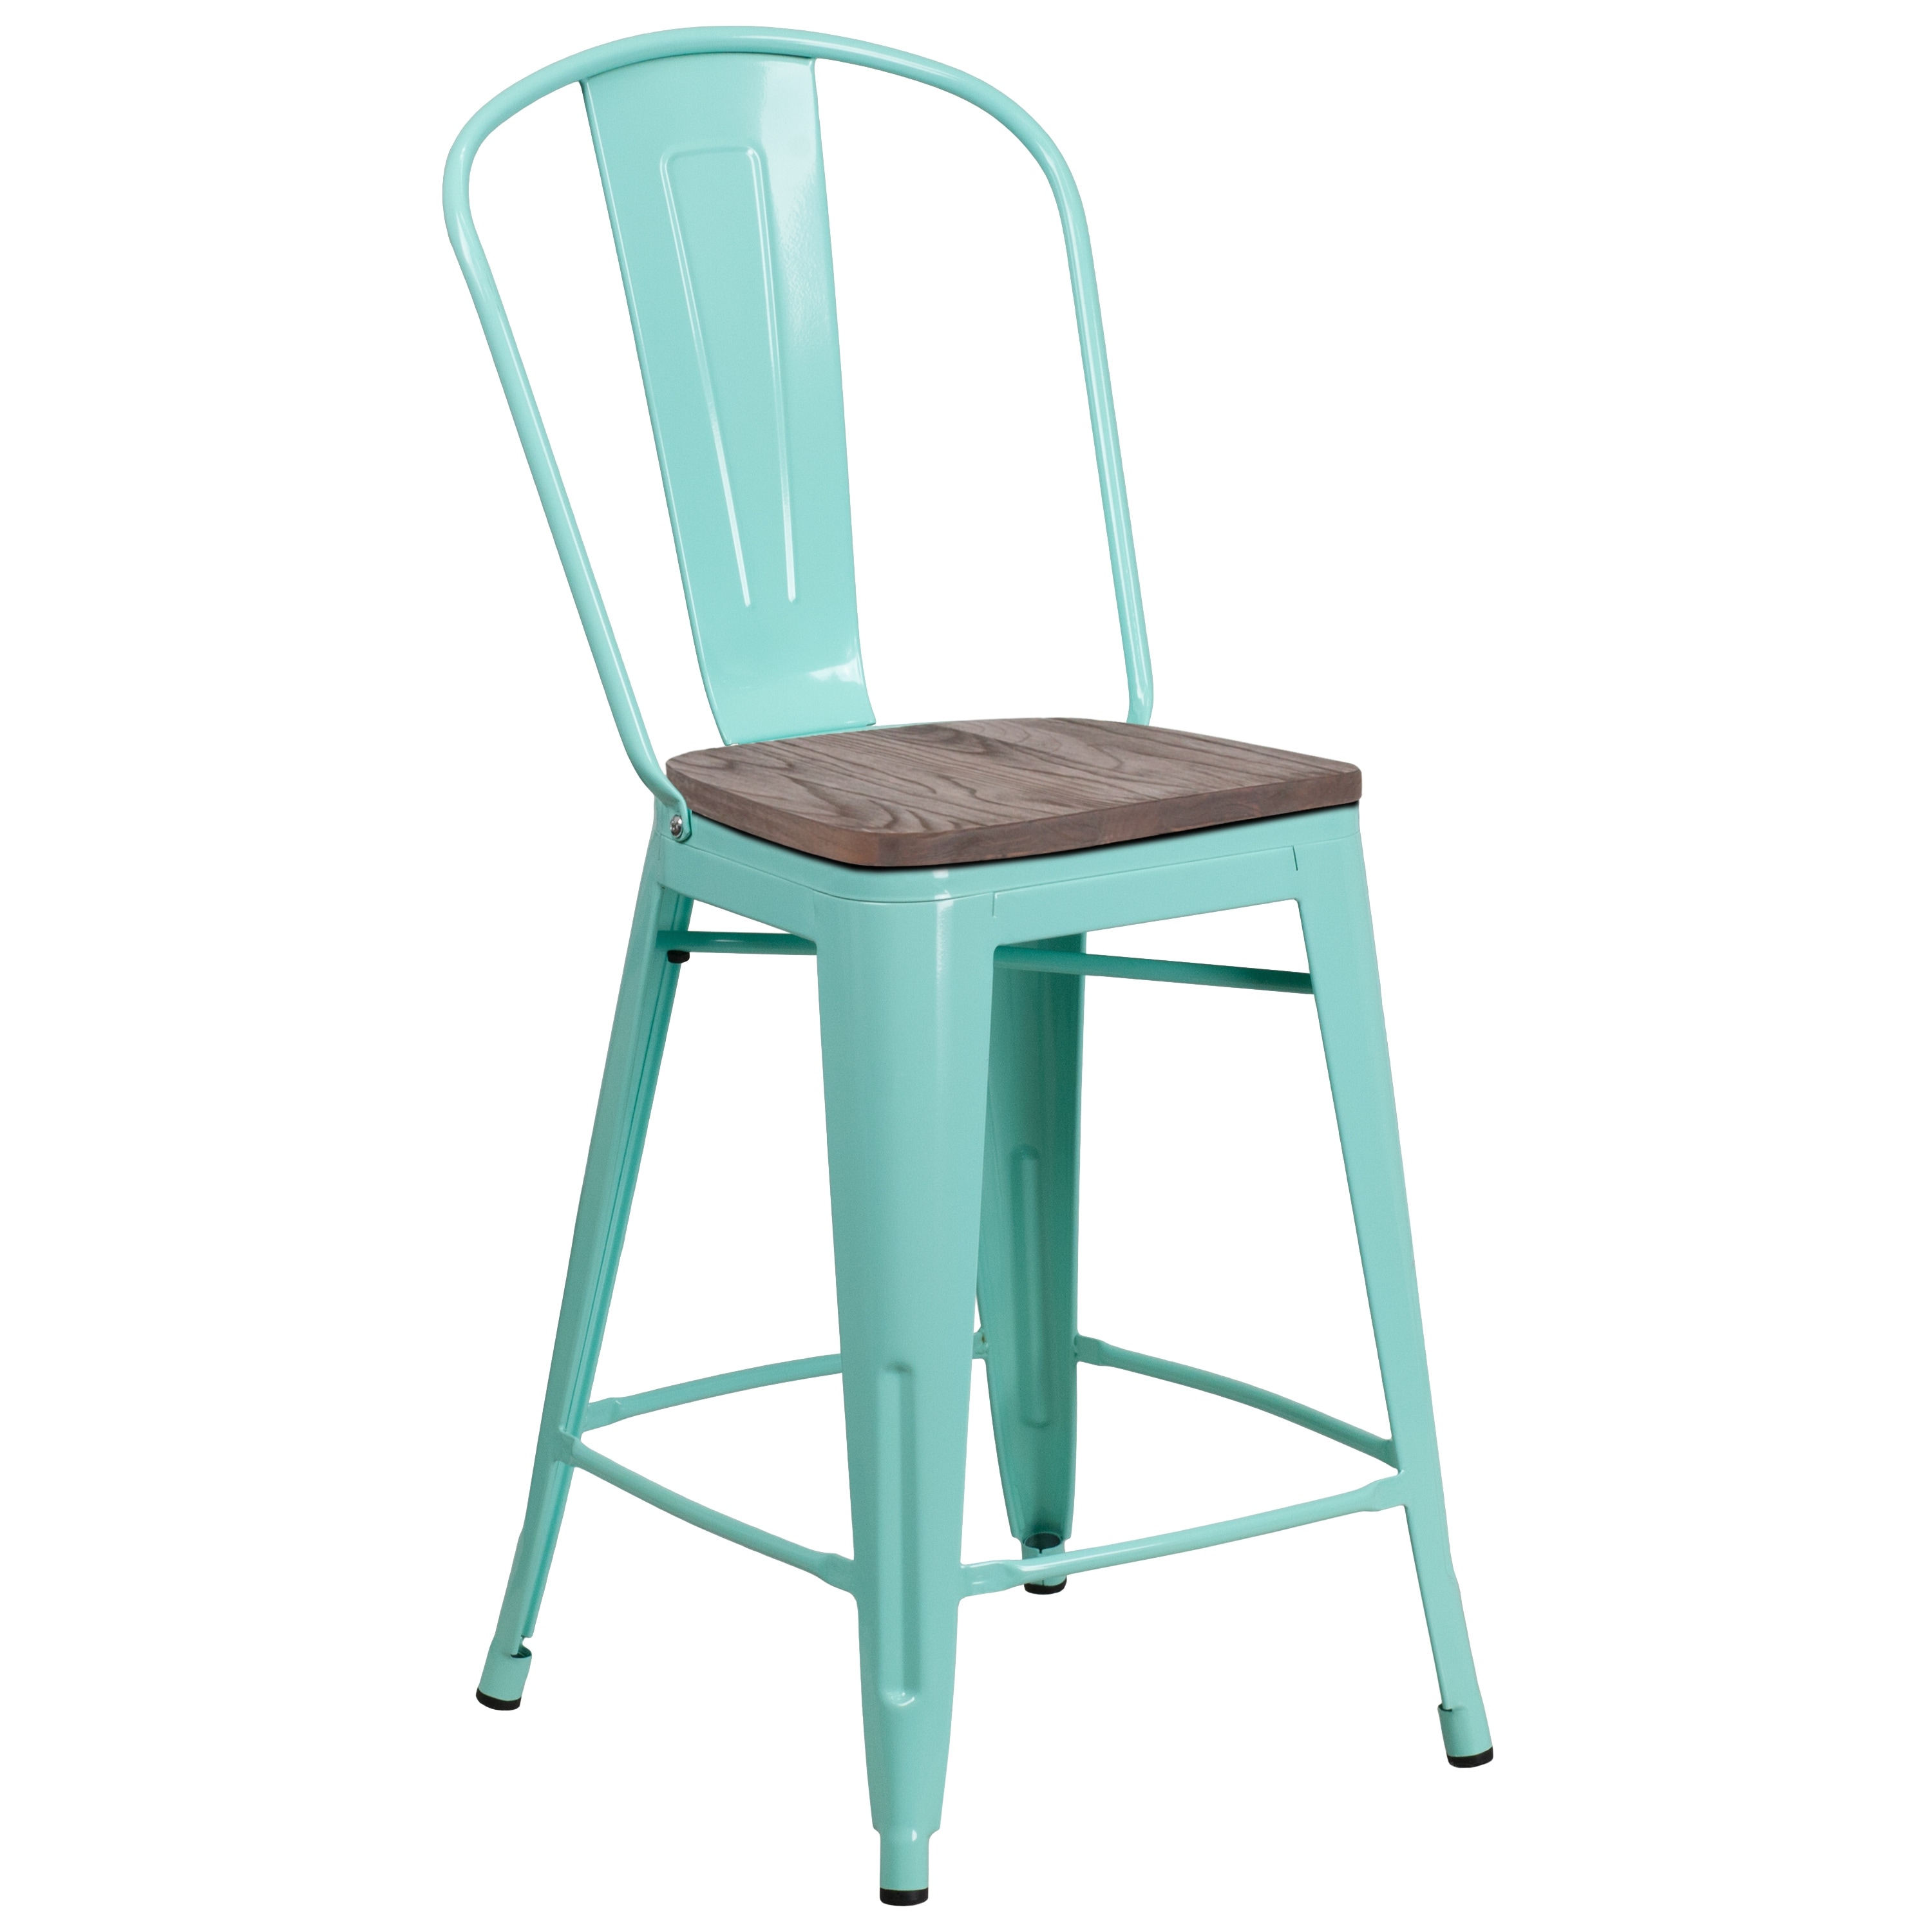 24 High Metal Counter Height Stool With Back And Wood Seat 1775w X 22d X 4025h Overstock 23478118